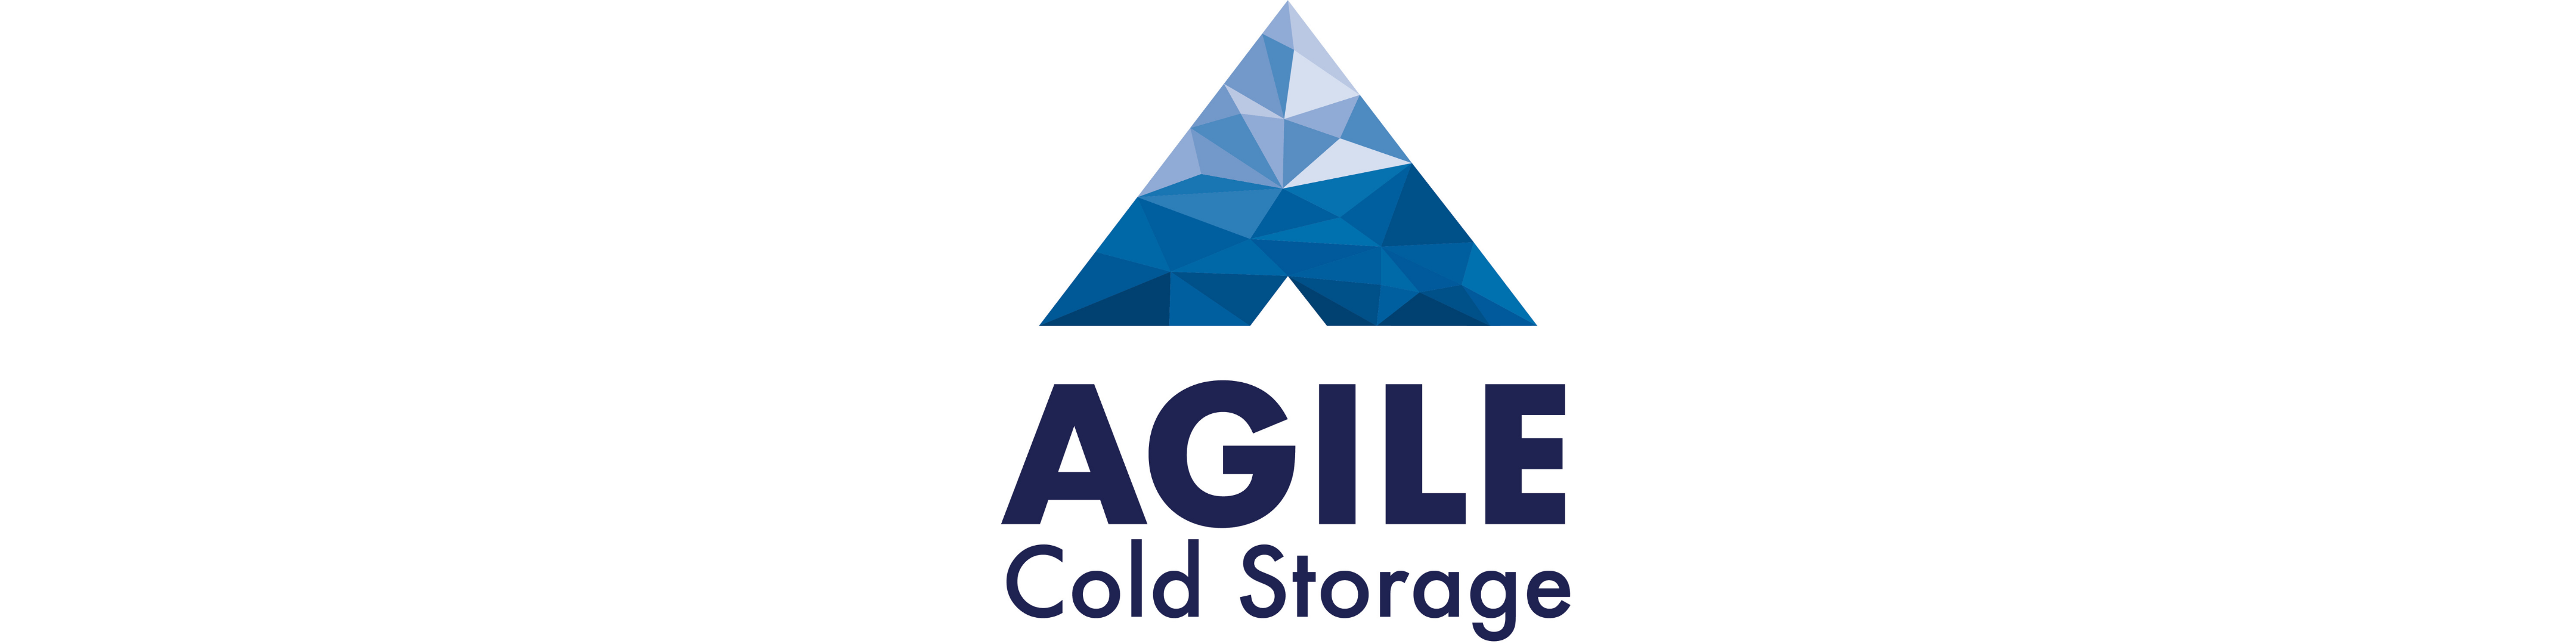 Agile Cold Storage to Build in Macon; New Facility to Support Southeast Market